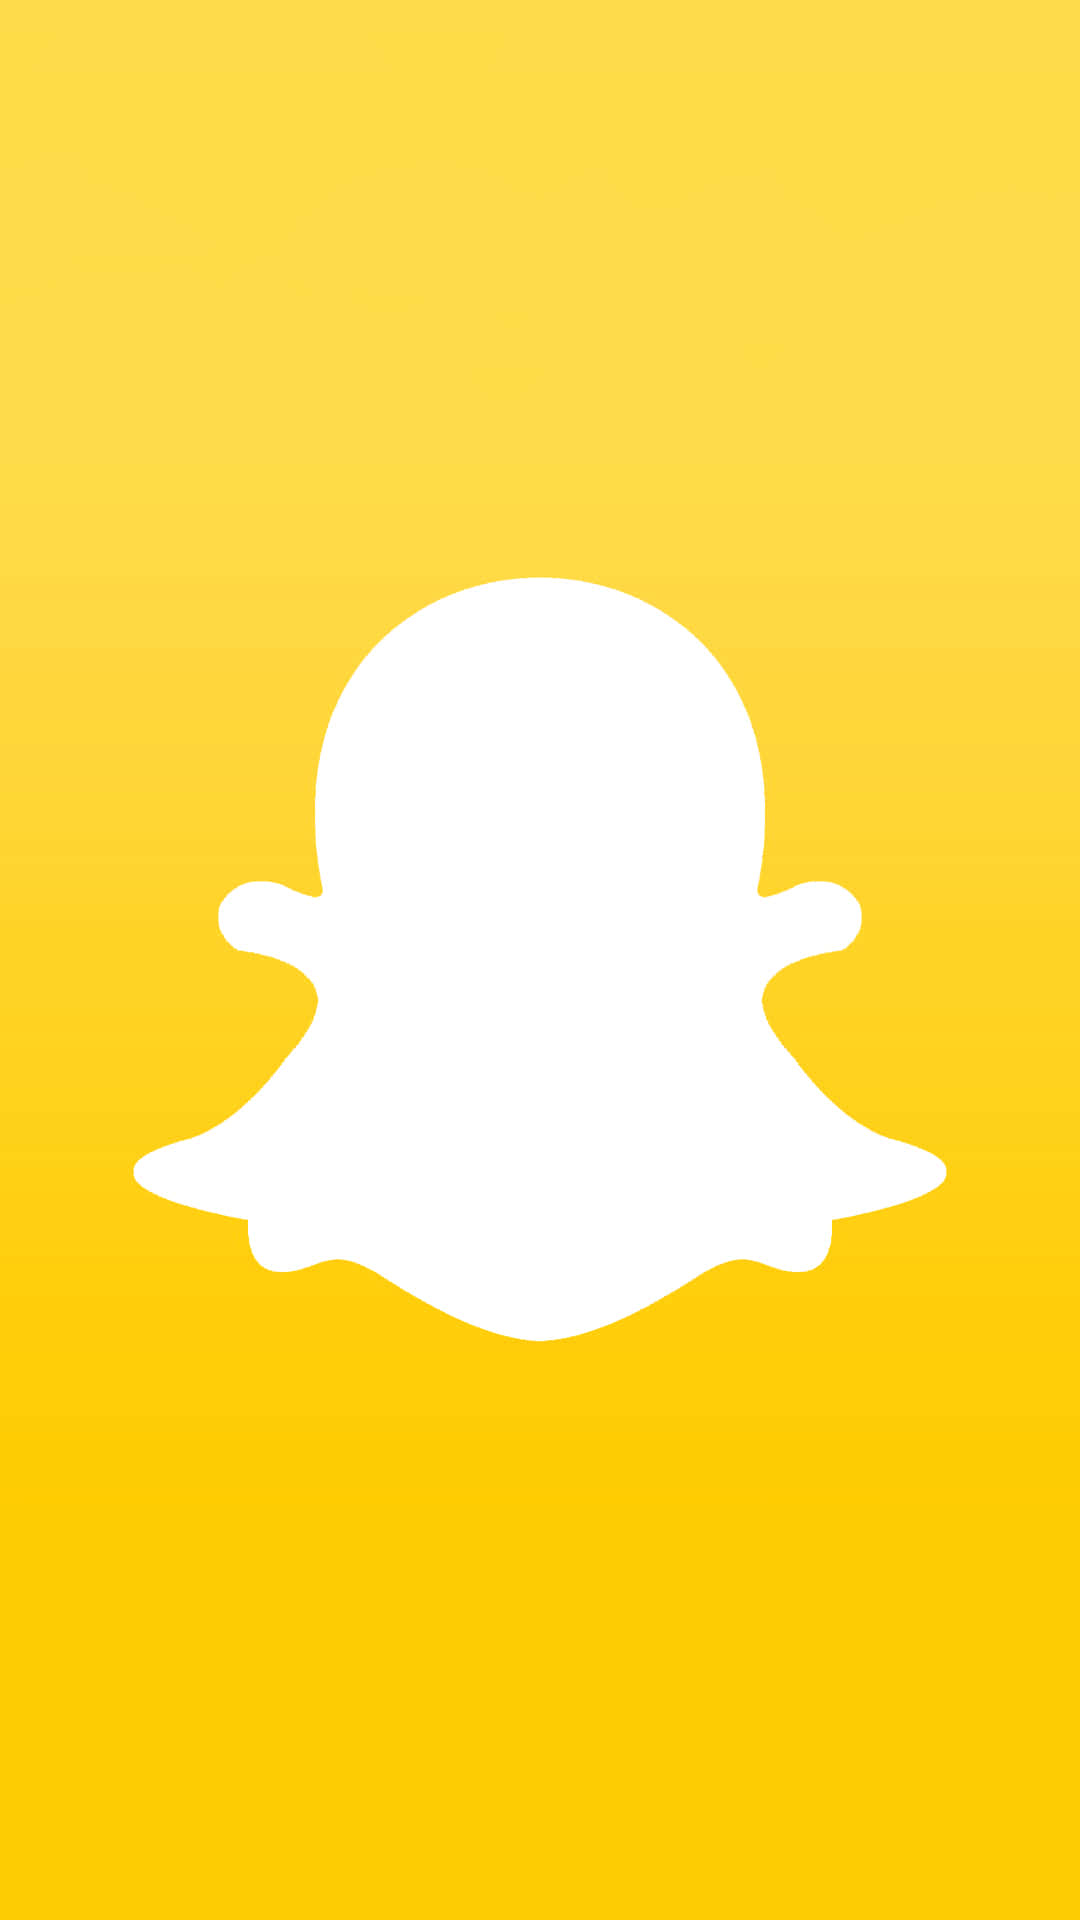 Share your story on Snapchat!